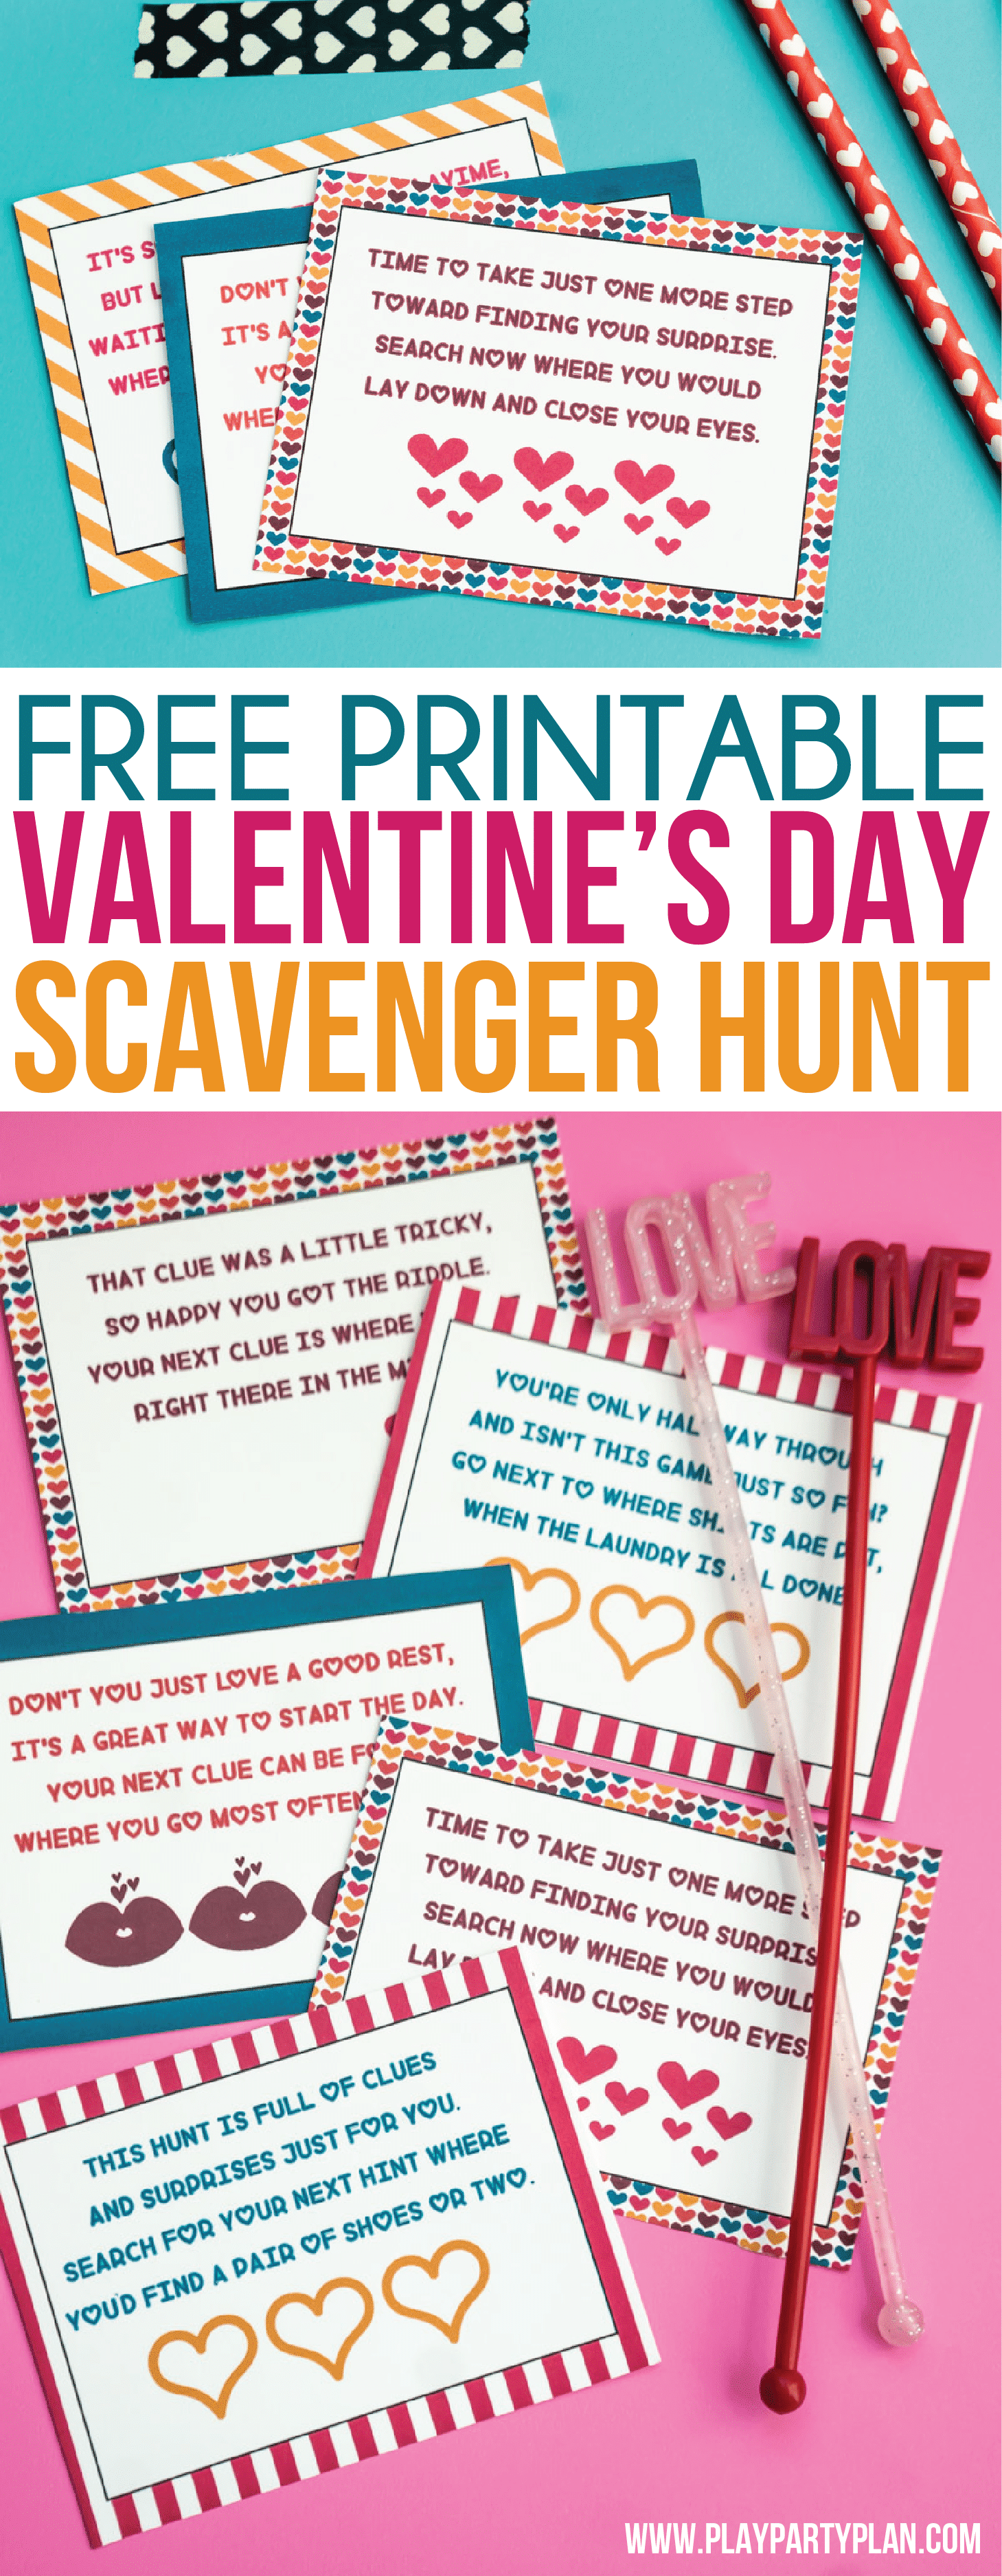 free-printable-valentine-s-day-scavenger-hunt-kids-adults-will-love